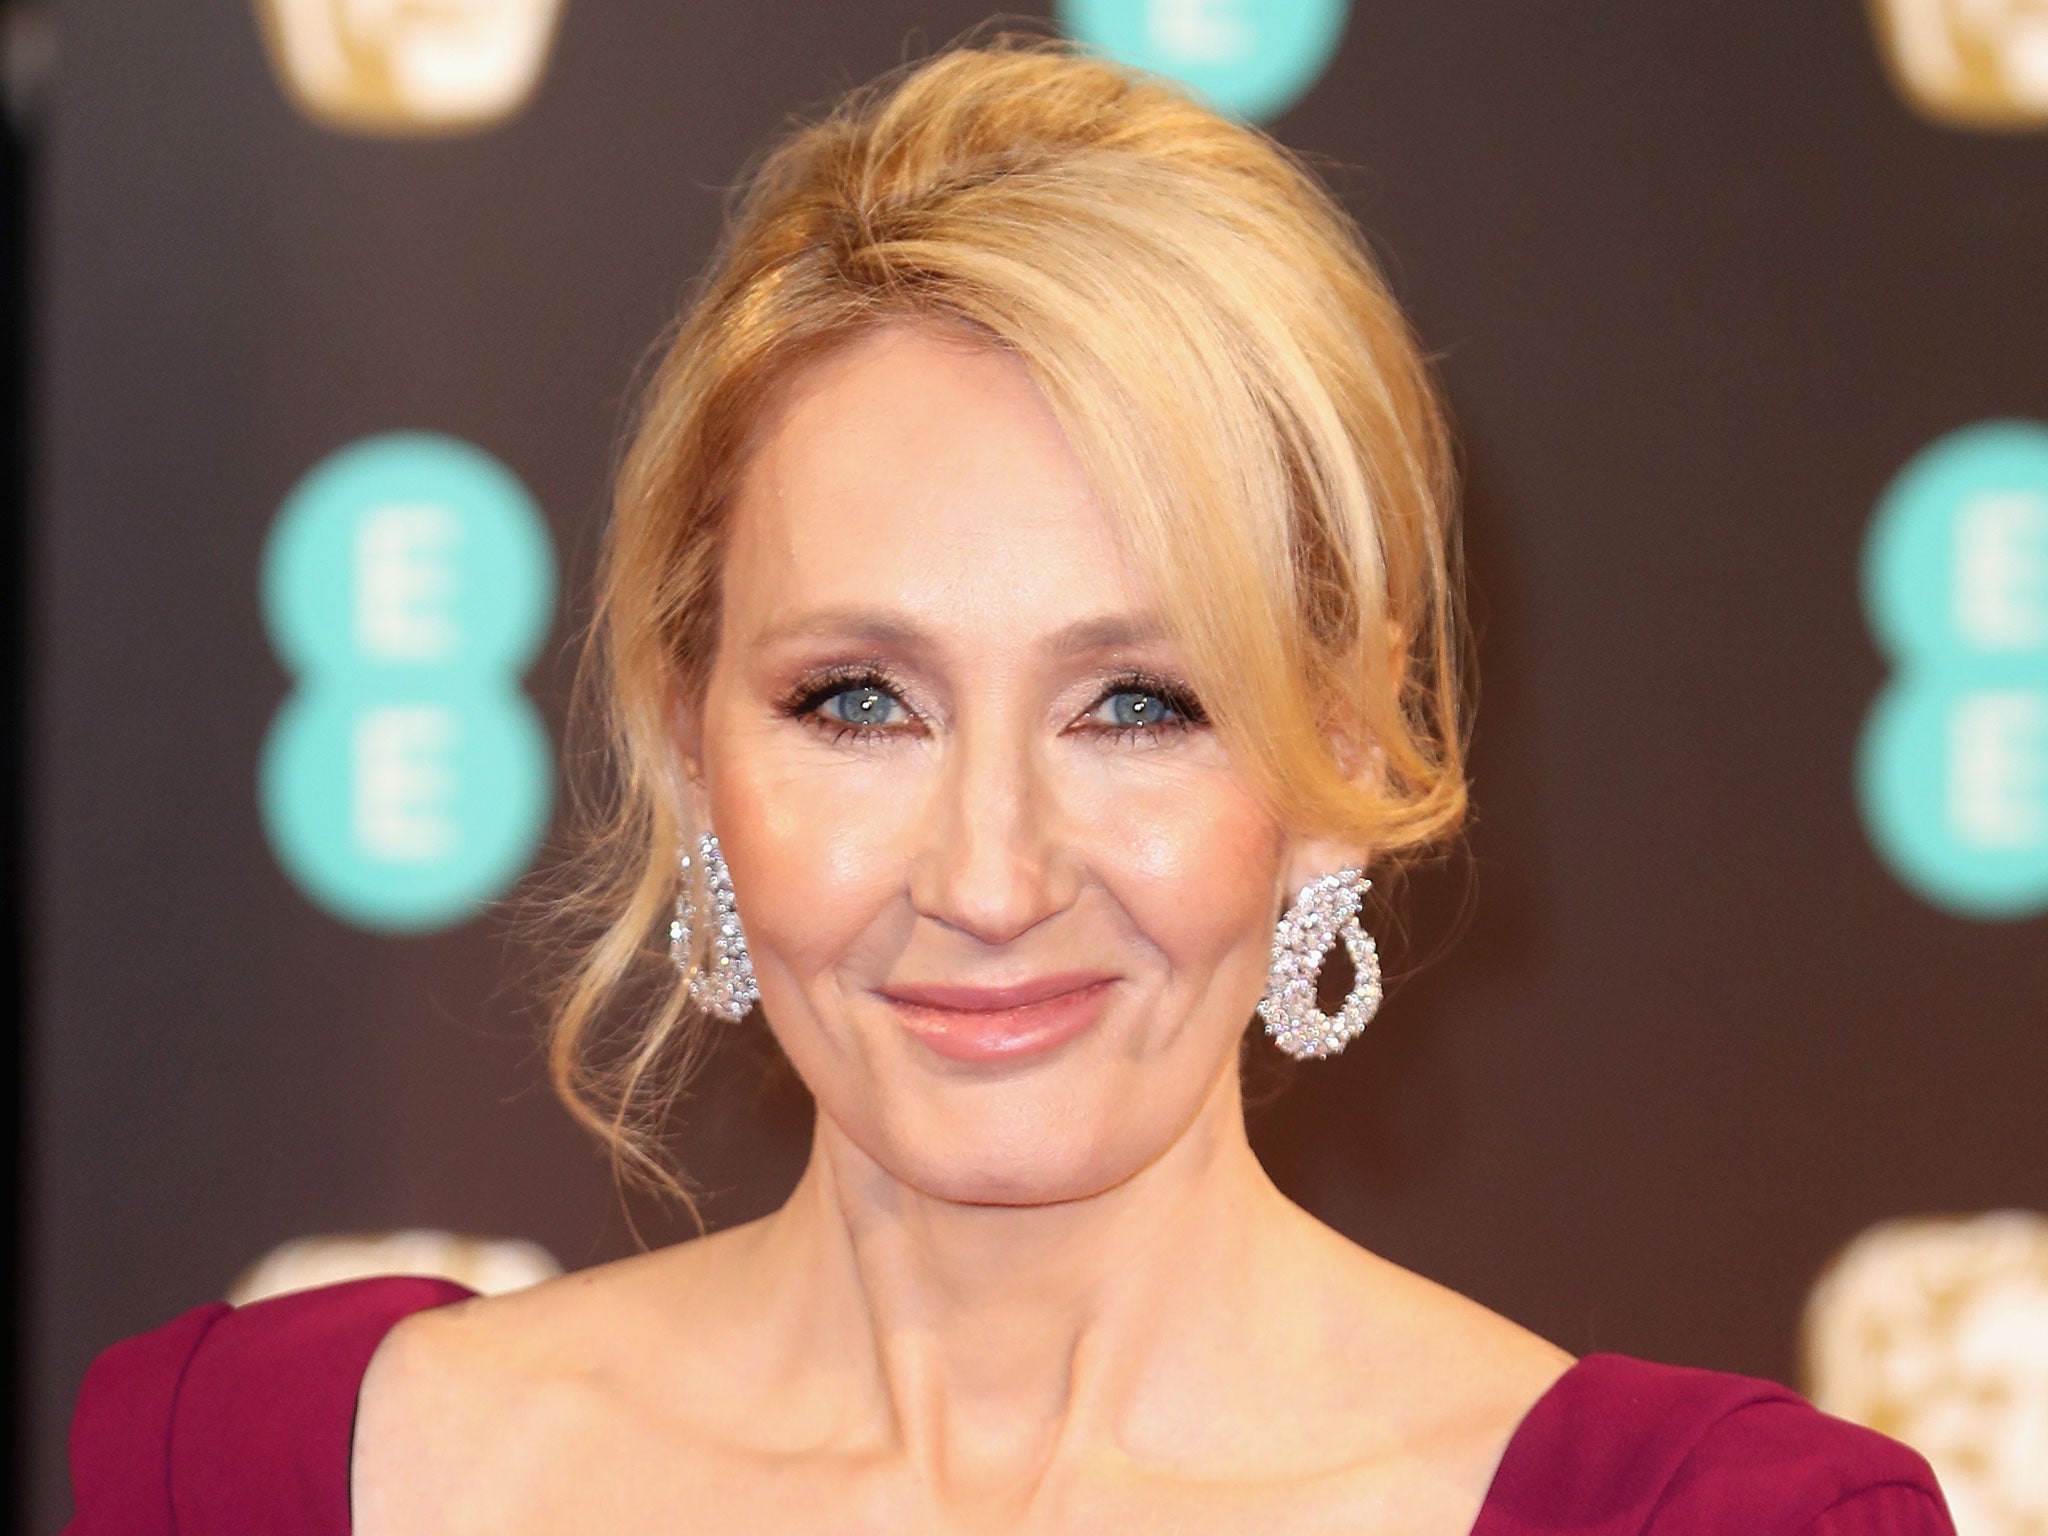 JK Rowling attends the 70th EE Bafta awards at Royal Albert Hall on 12 February 2017 in London